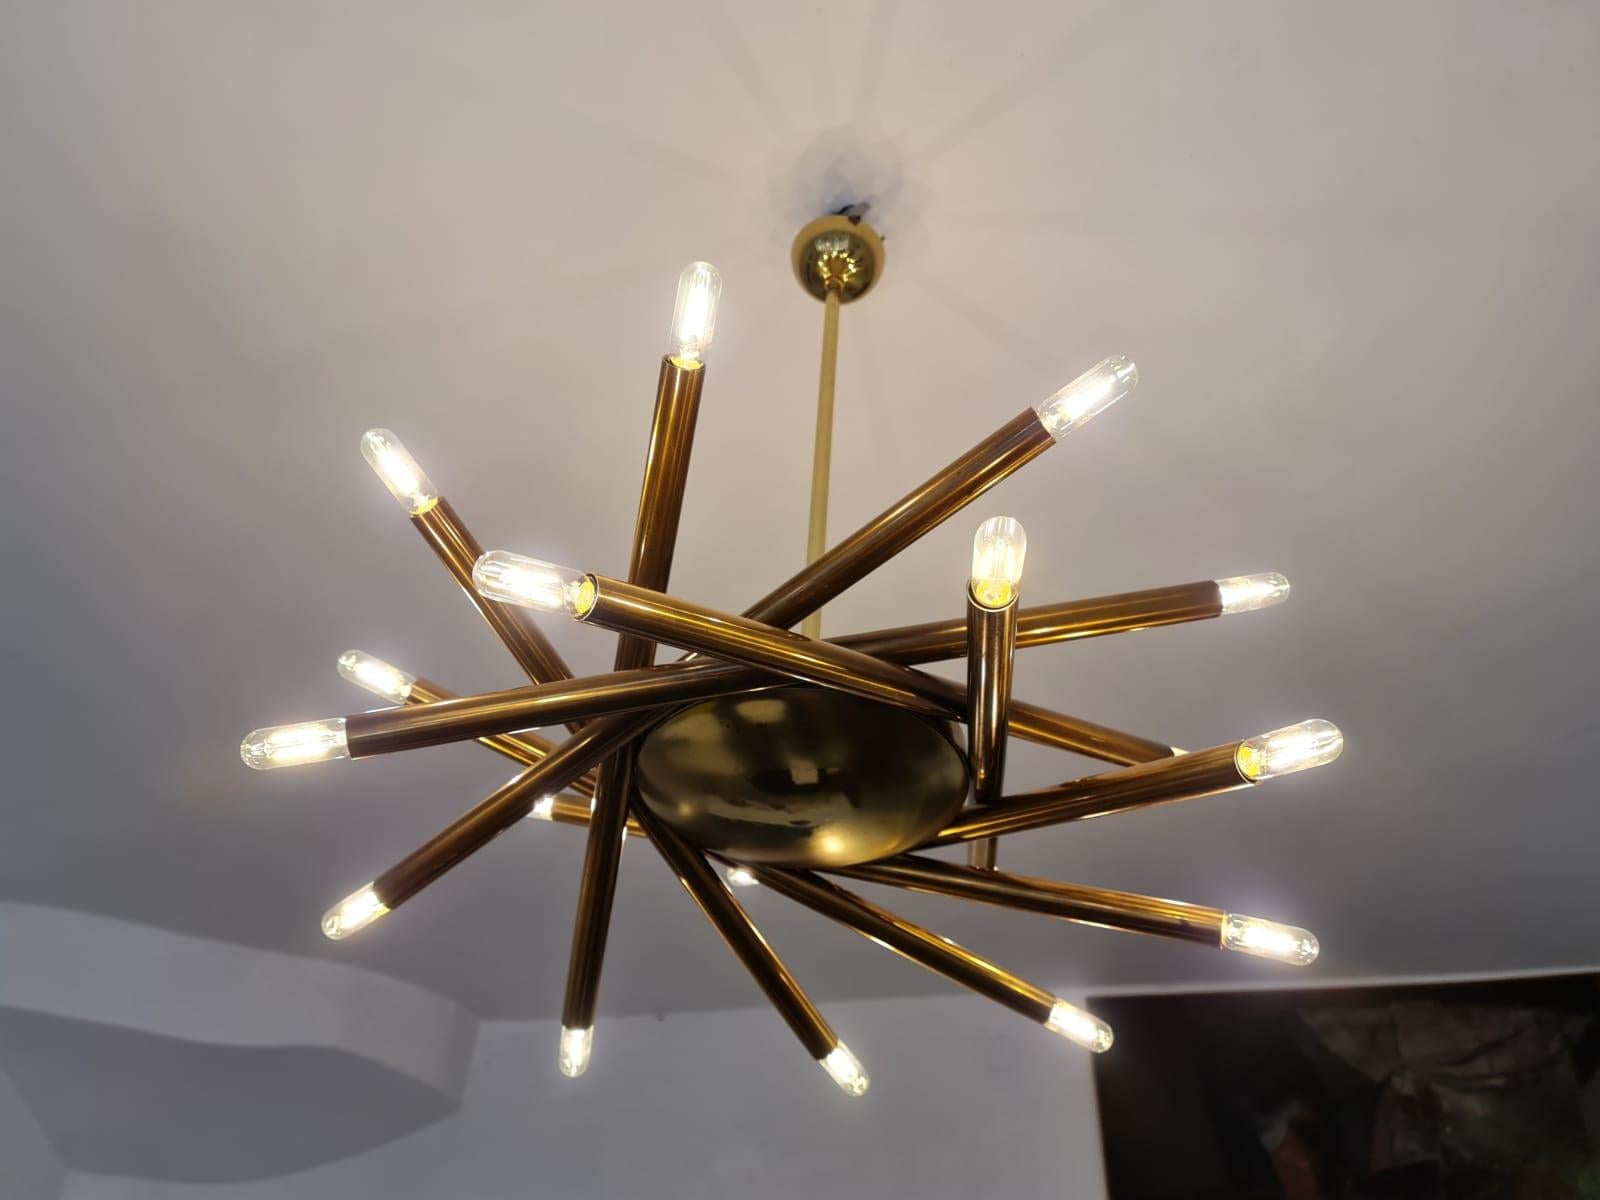 Rare original brass Sputnik ceiling lamp by Stilnovo, Italy 1950

This is an impressive, well documented and beautifully crafted full brass Stilnovo pendant lamp with a disk like brass centerpiece and 9 brass tubes with 18 light sources. 

The